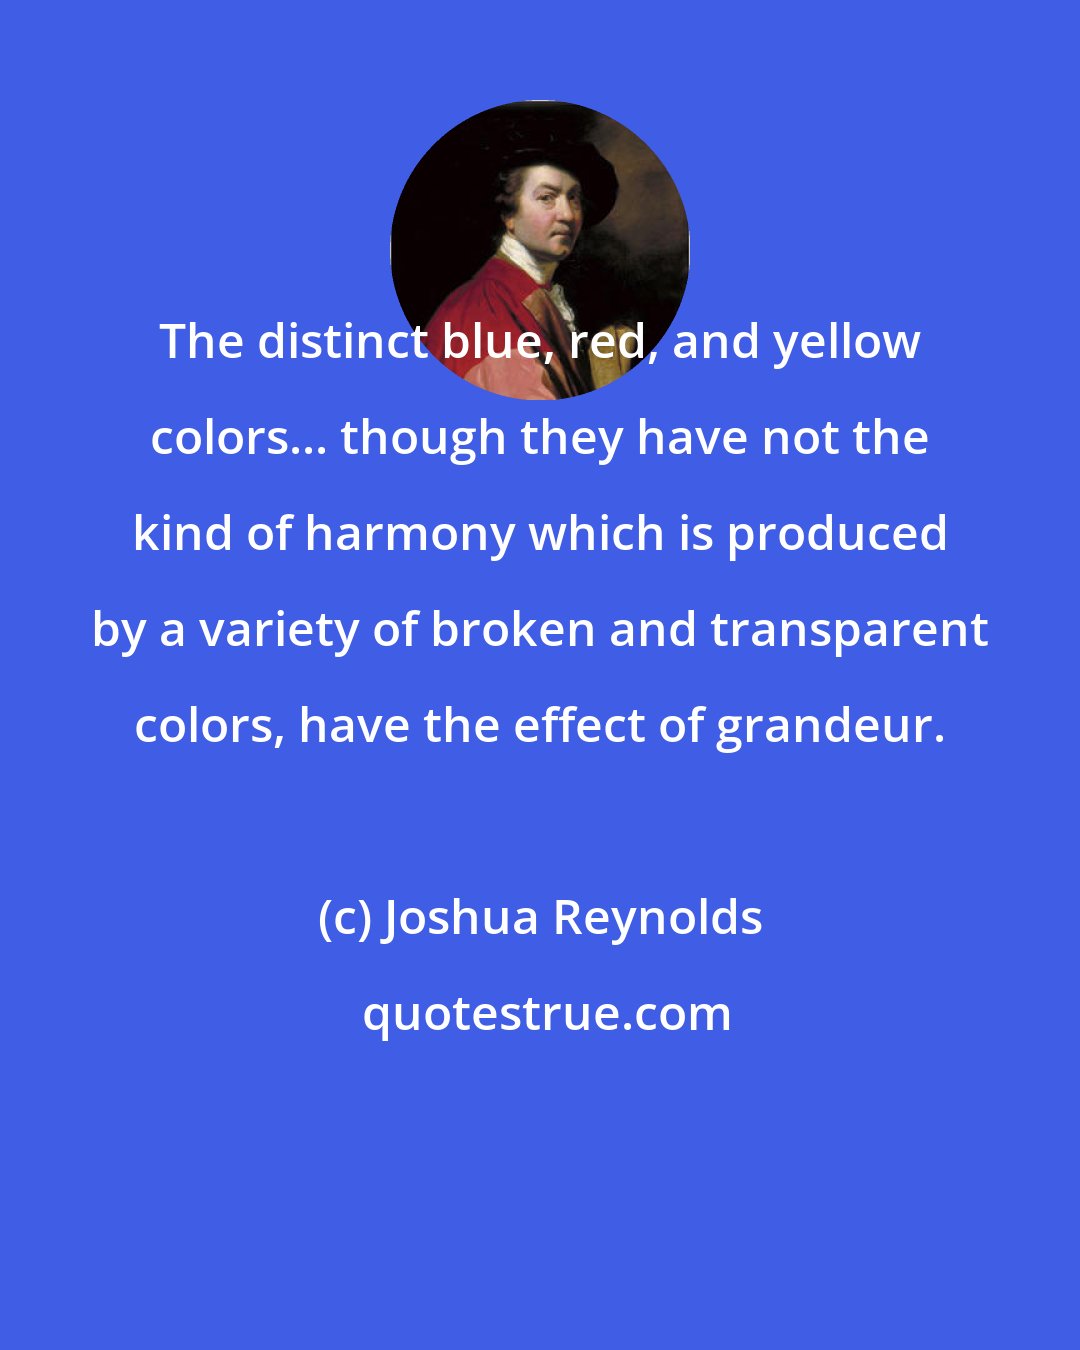 Joshua Reynolds: The distinct blue, red, and yellow colors... though they have not the kind of harmony which is produced by a variety of broken and transparent colors, have the effect of grandeur.